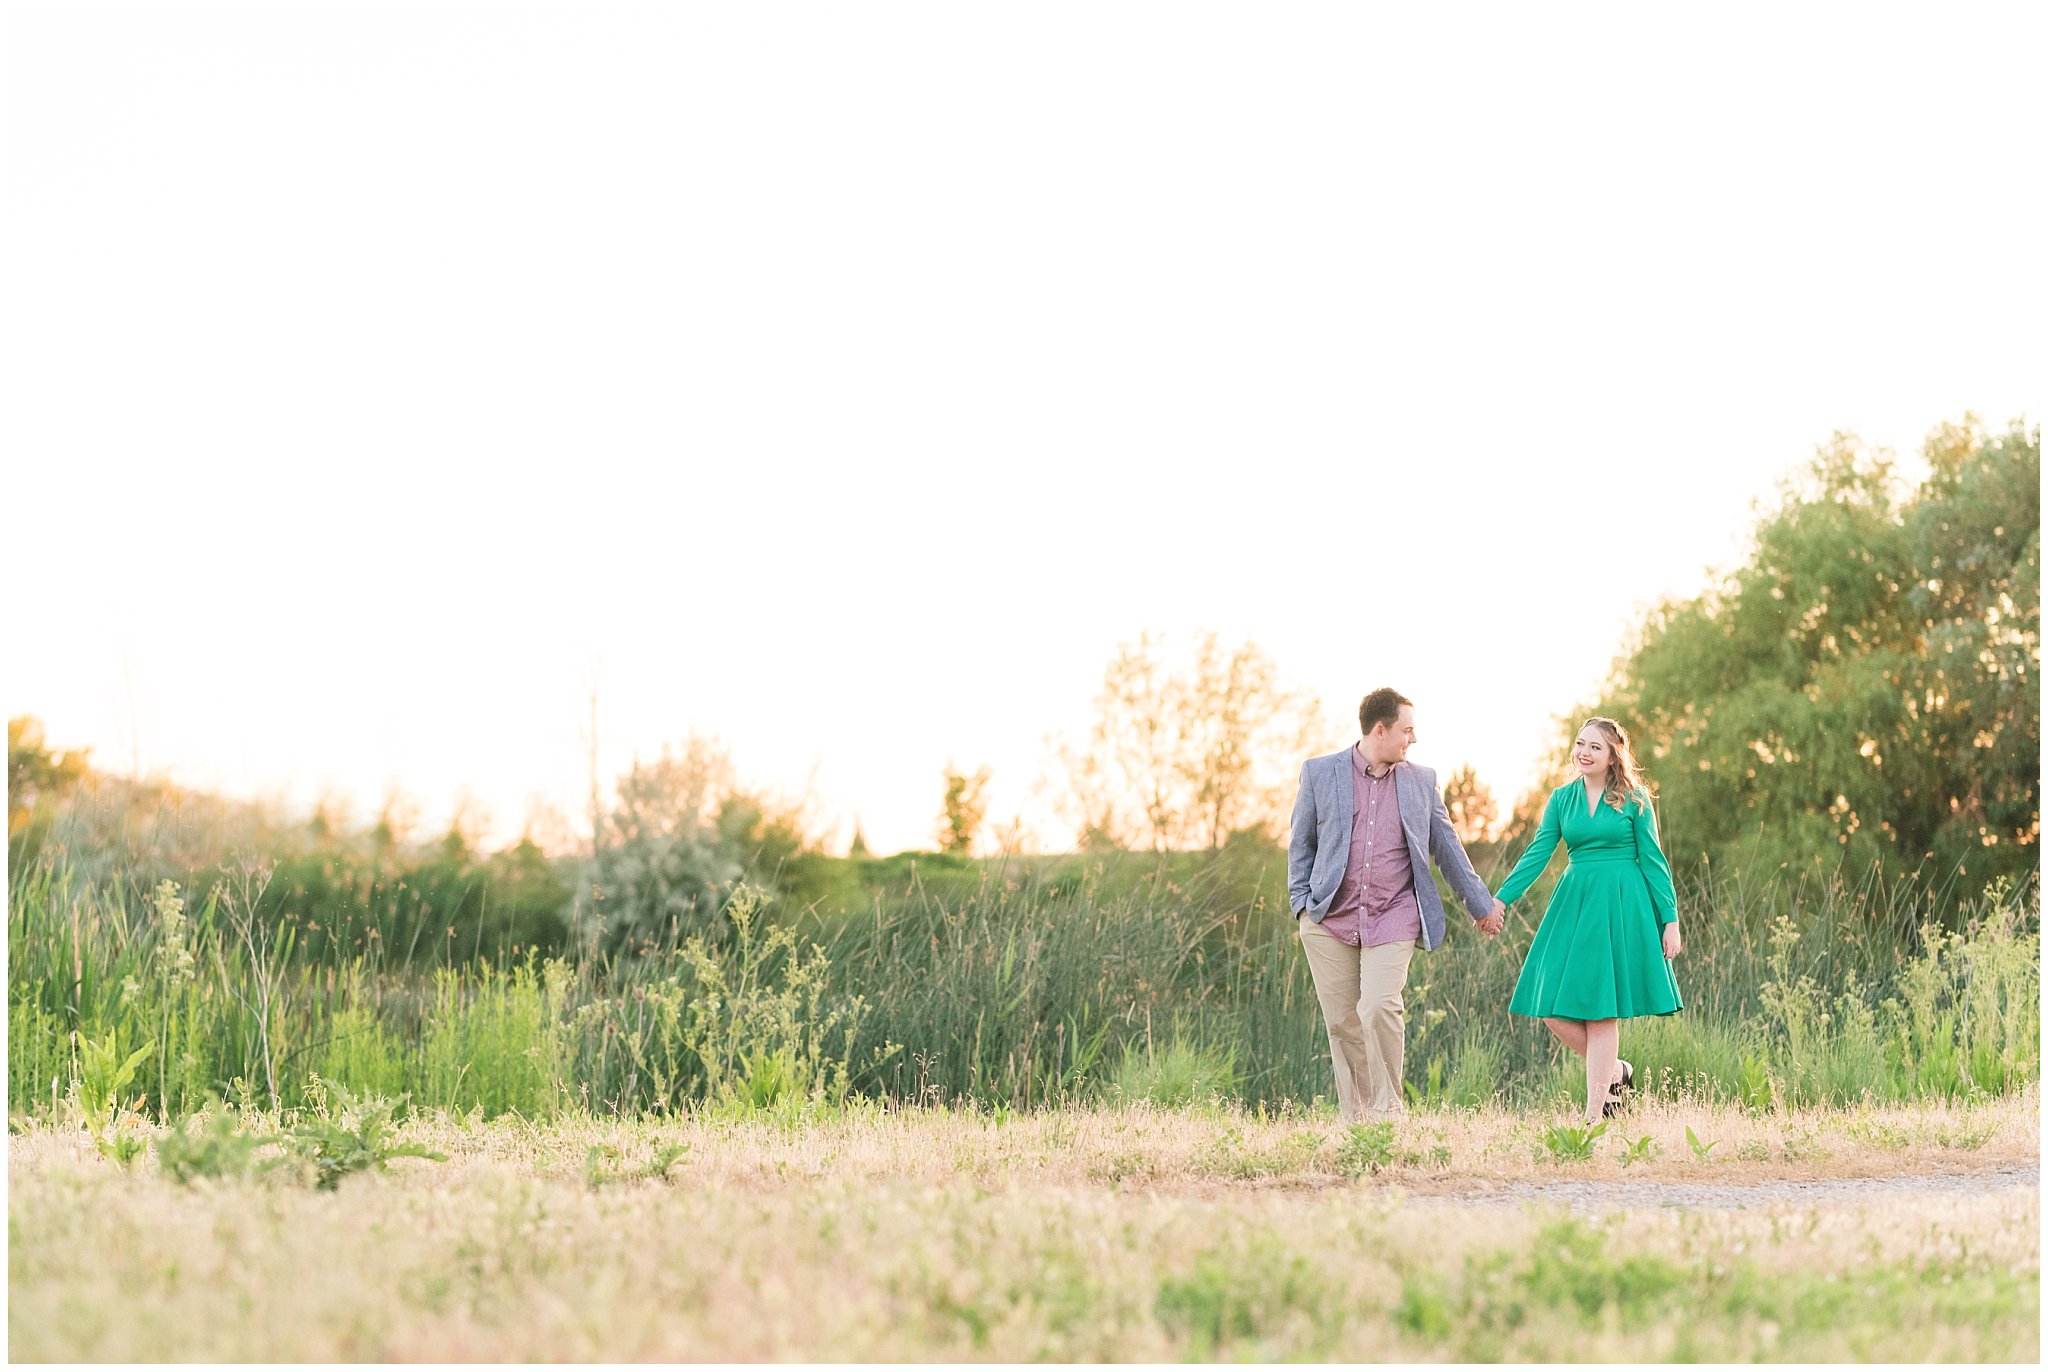 Couple in a garden for their engagement session with a vintage 1950s dress | Summer USU Botanical Garden Engagement Session | Jessie and Dallin Photography